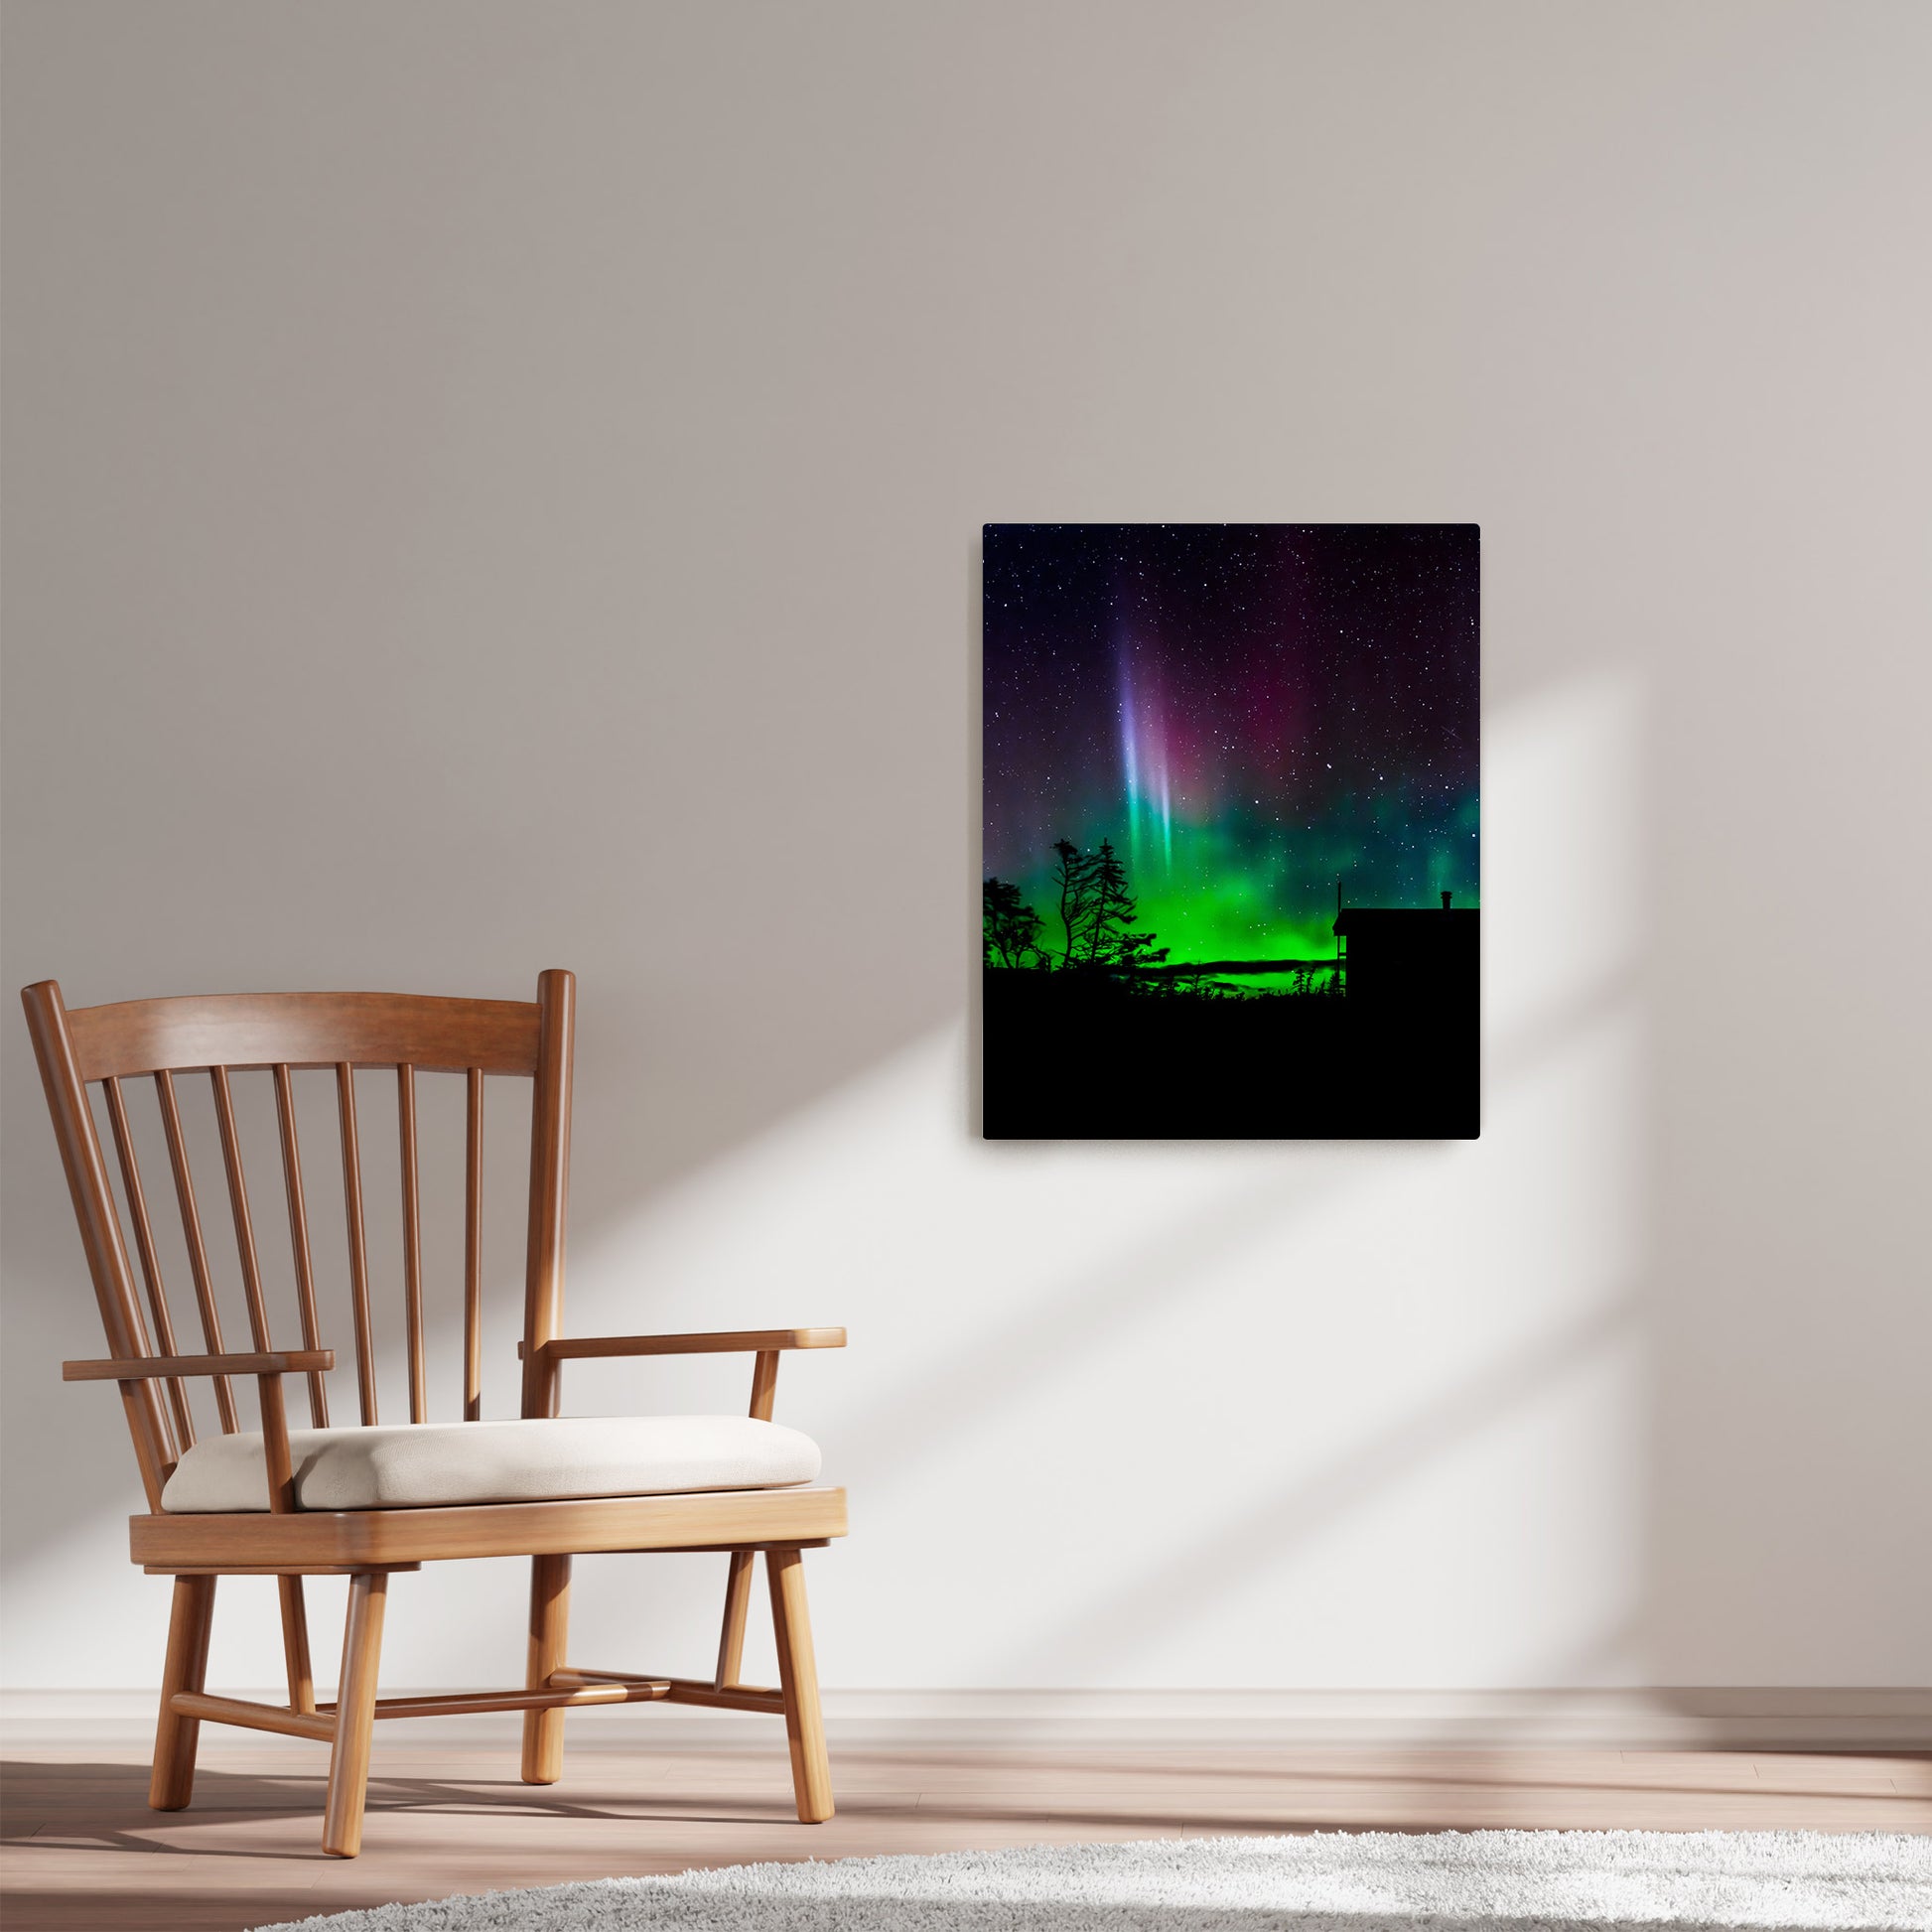 Ray Mackey's Gaff Topsails Aurora photography reproduced on HD metal print and displayed on wall